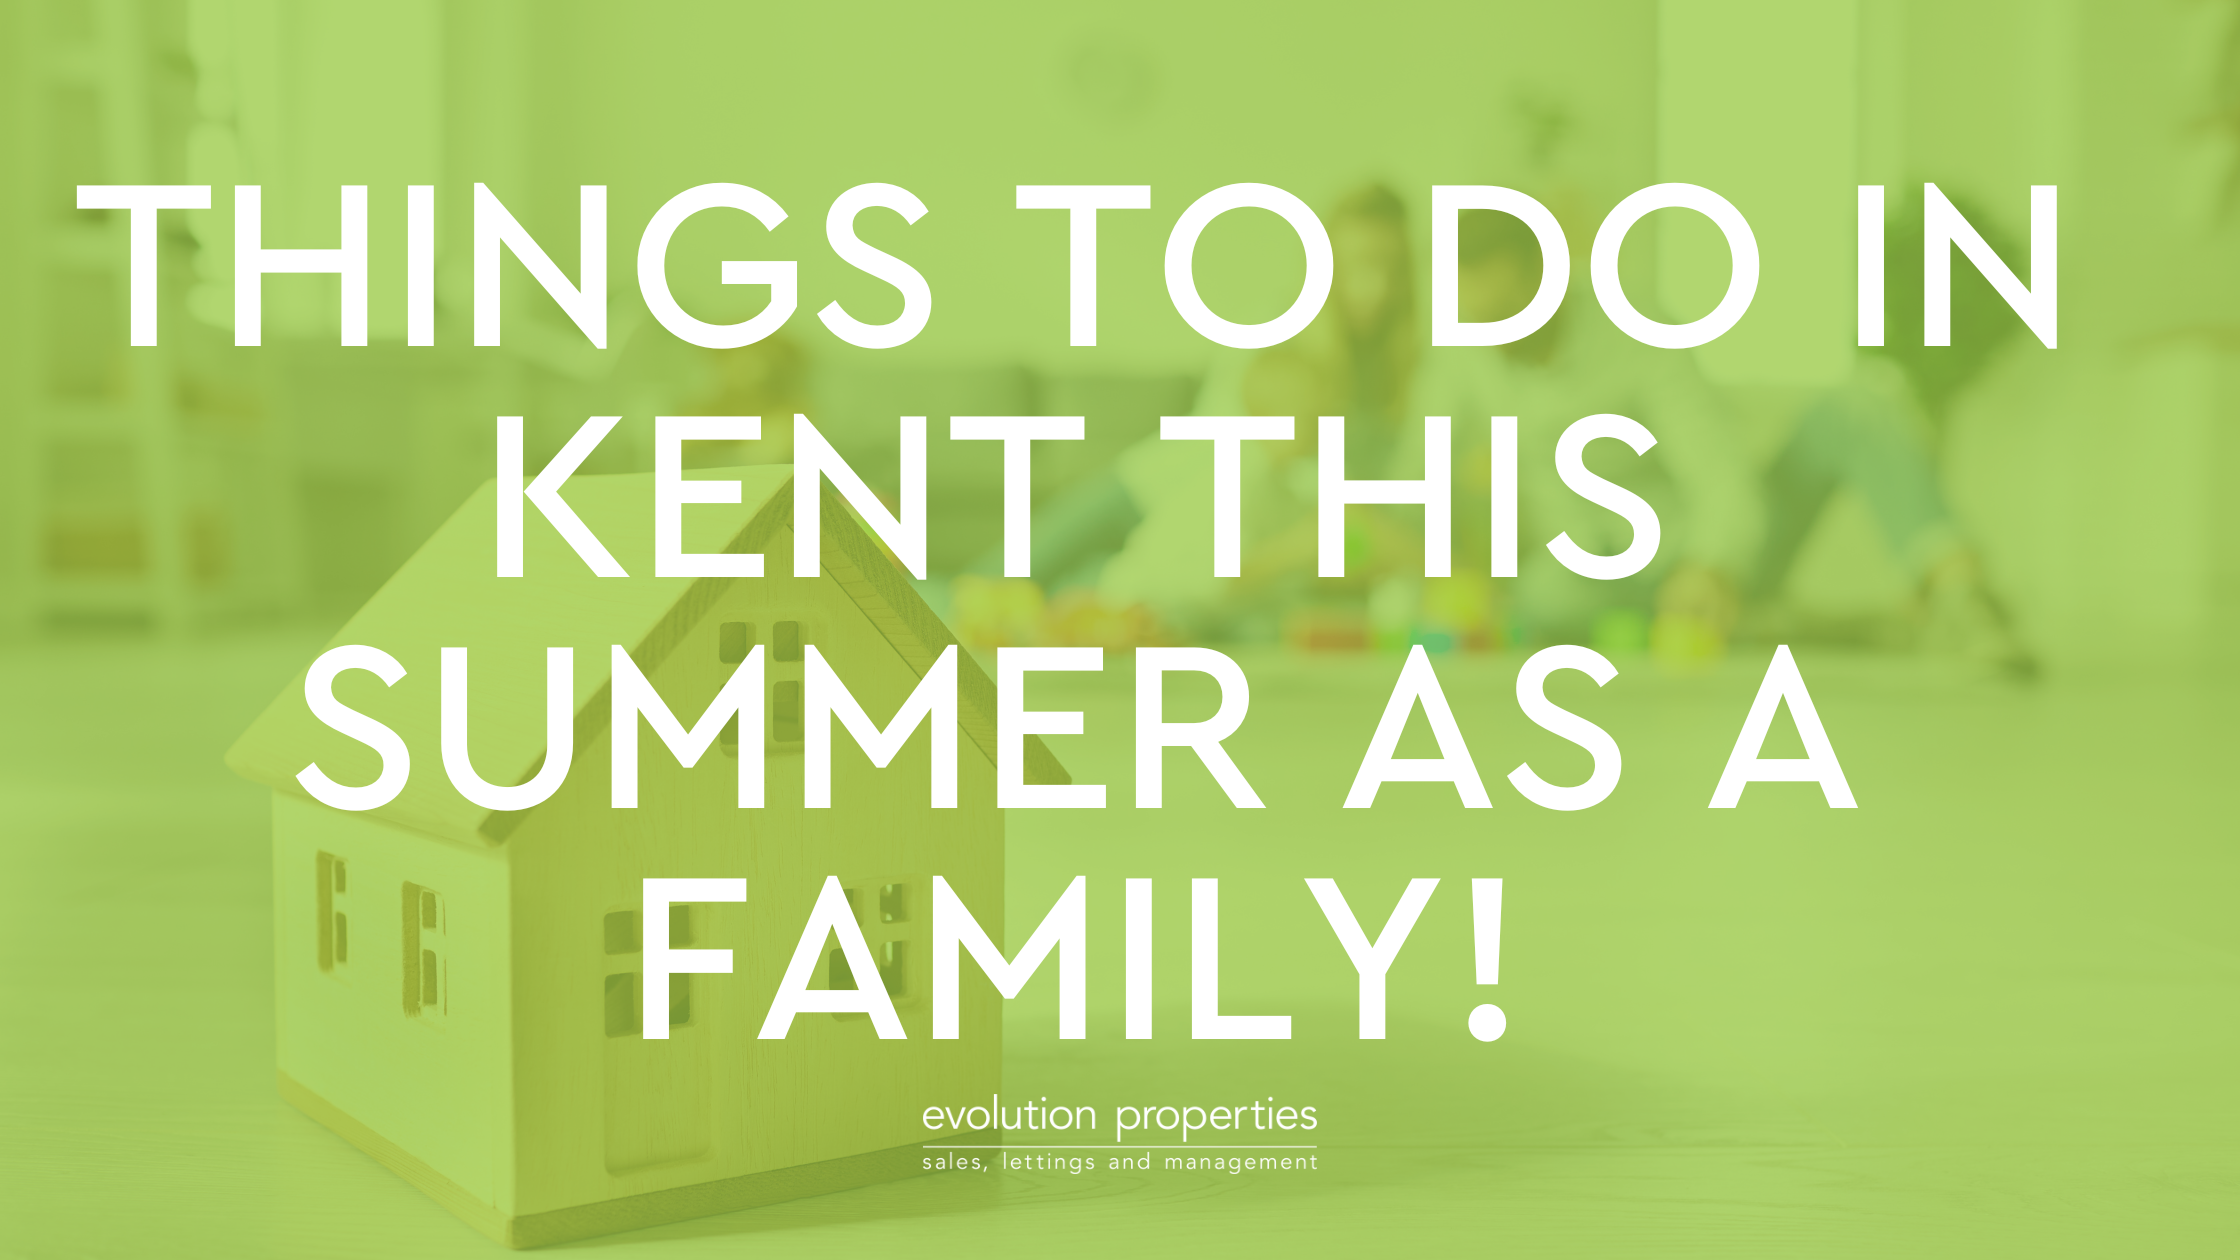 Things to do in Kent this Summer as a family!